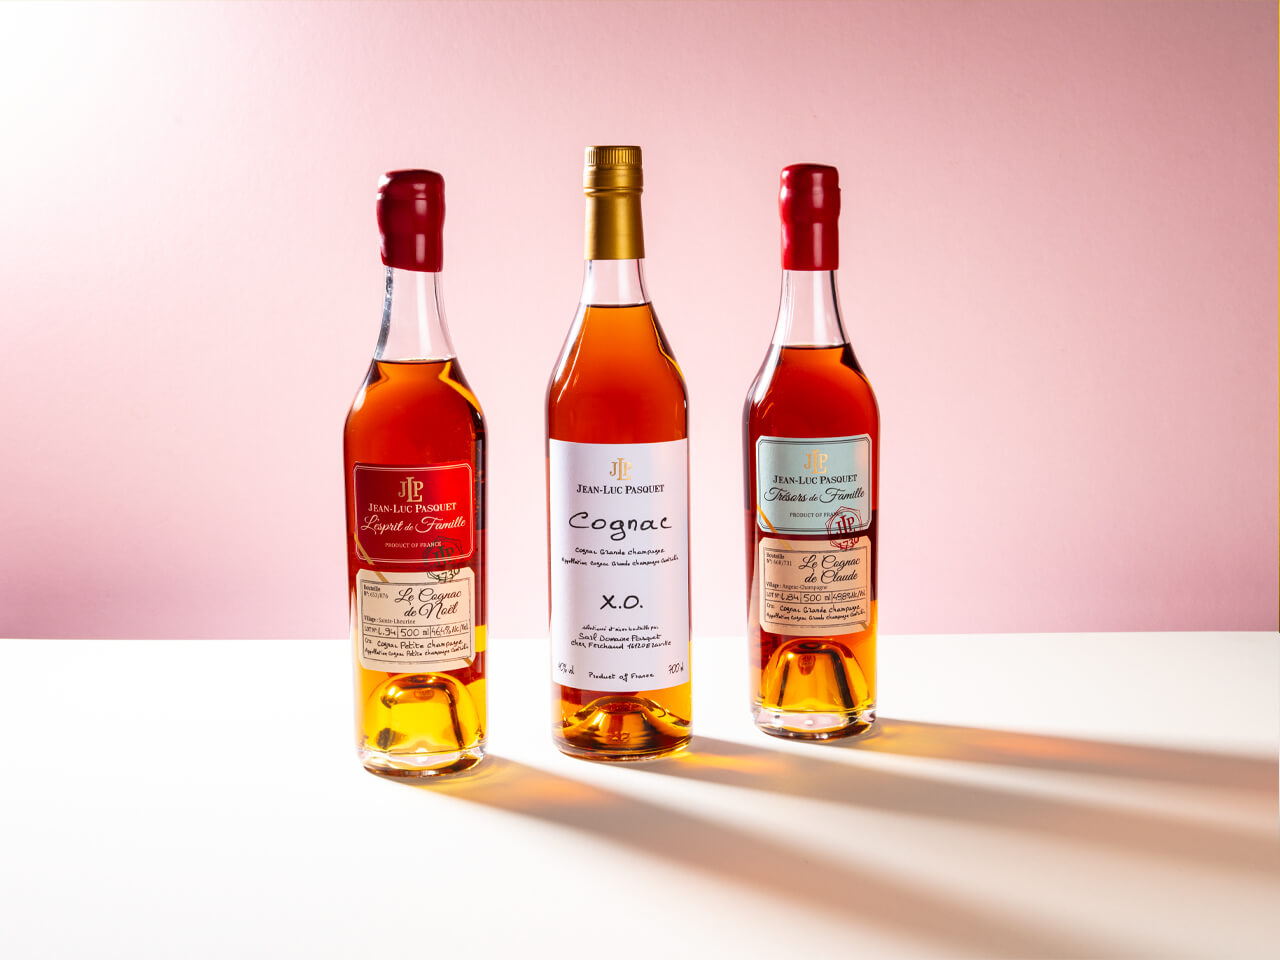 Other Cognacs from Jean-Luc Pasquet